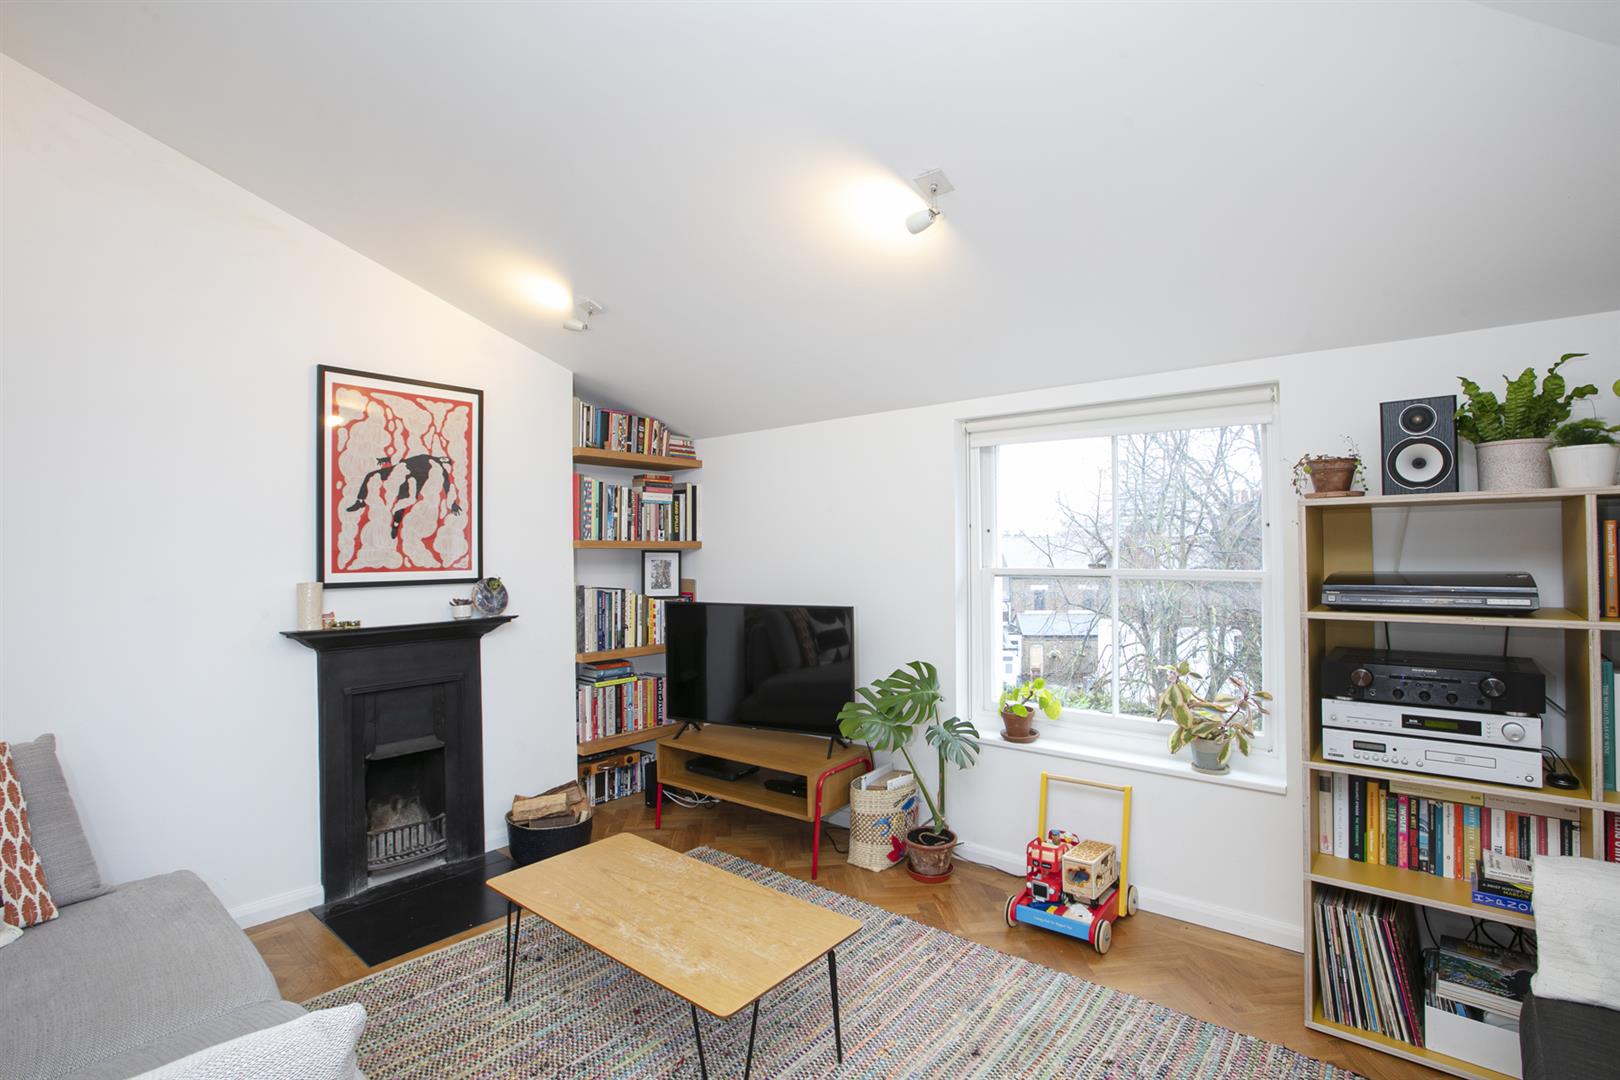 Flat - Conversion For Sale in Holly Grove, Peckham, SE15 893 view18